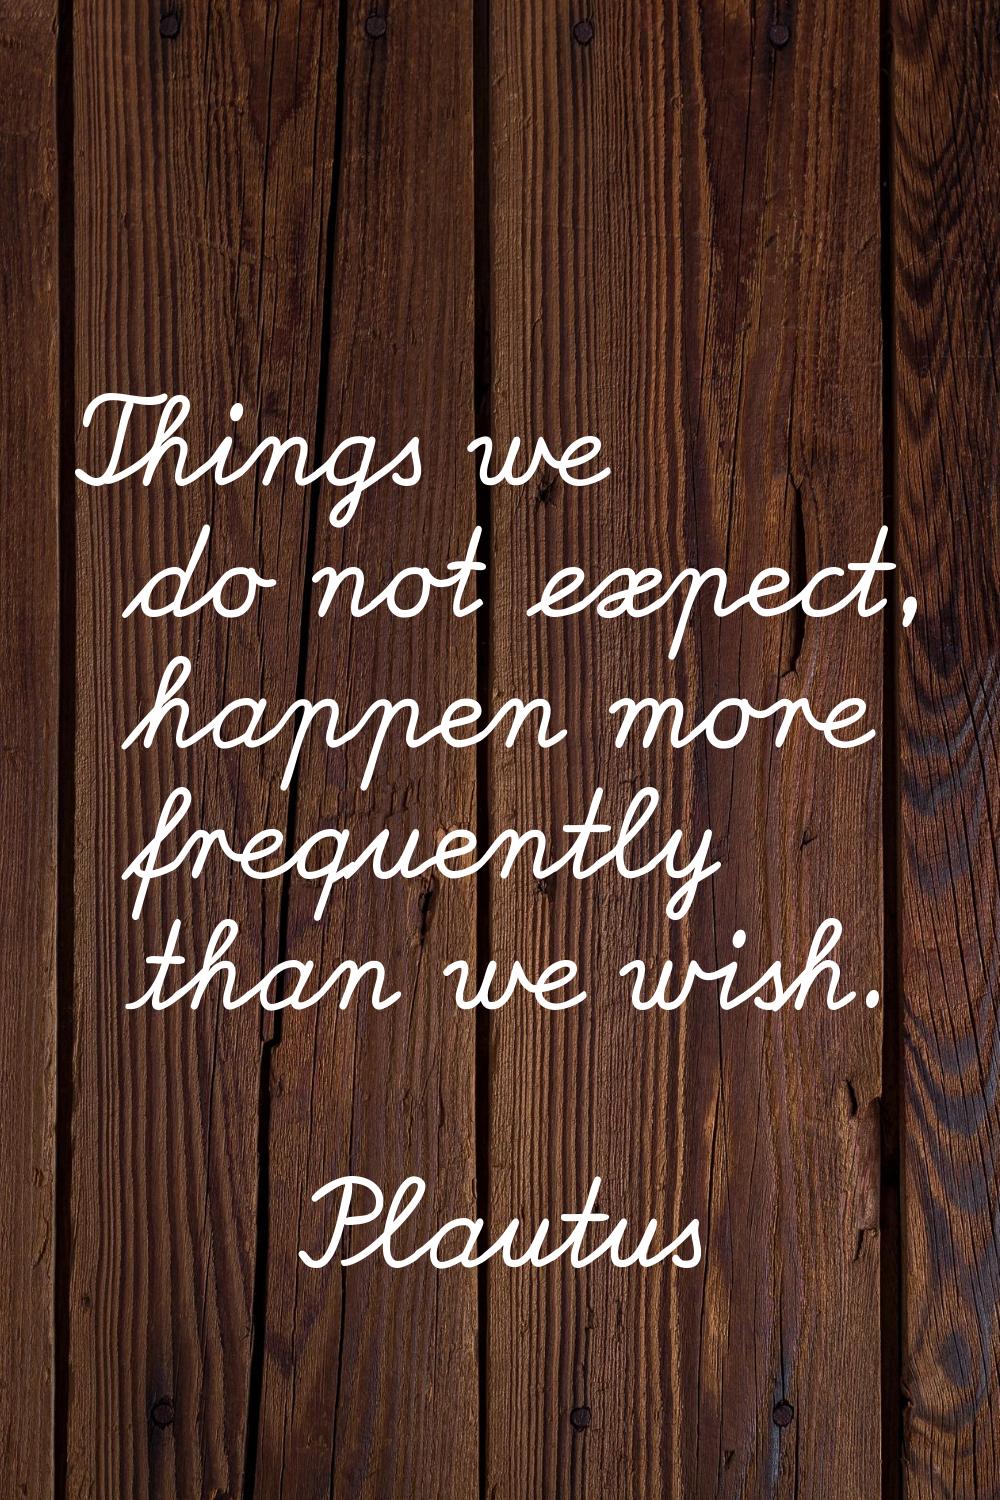 Things we do not expect, happen more frequently than we wish.